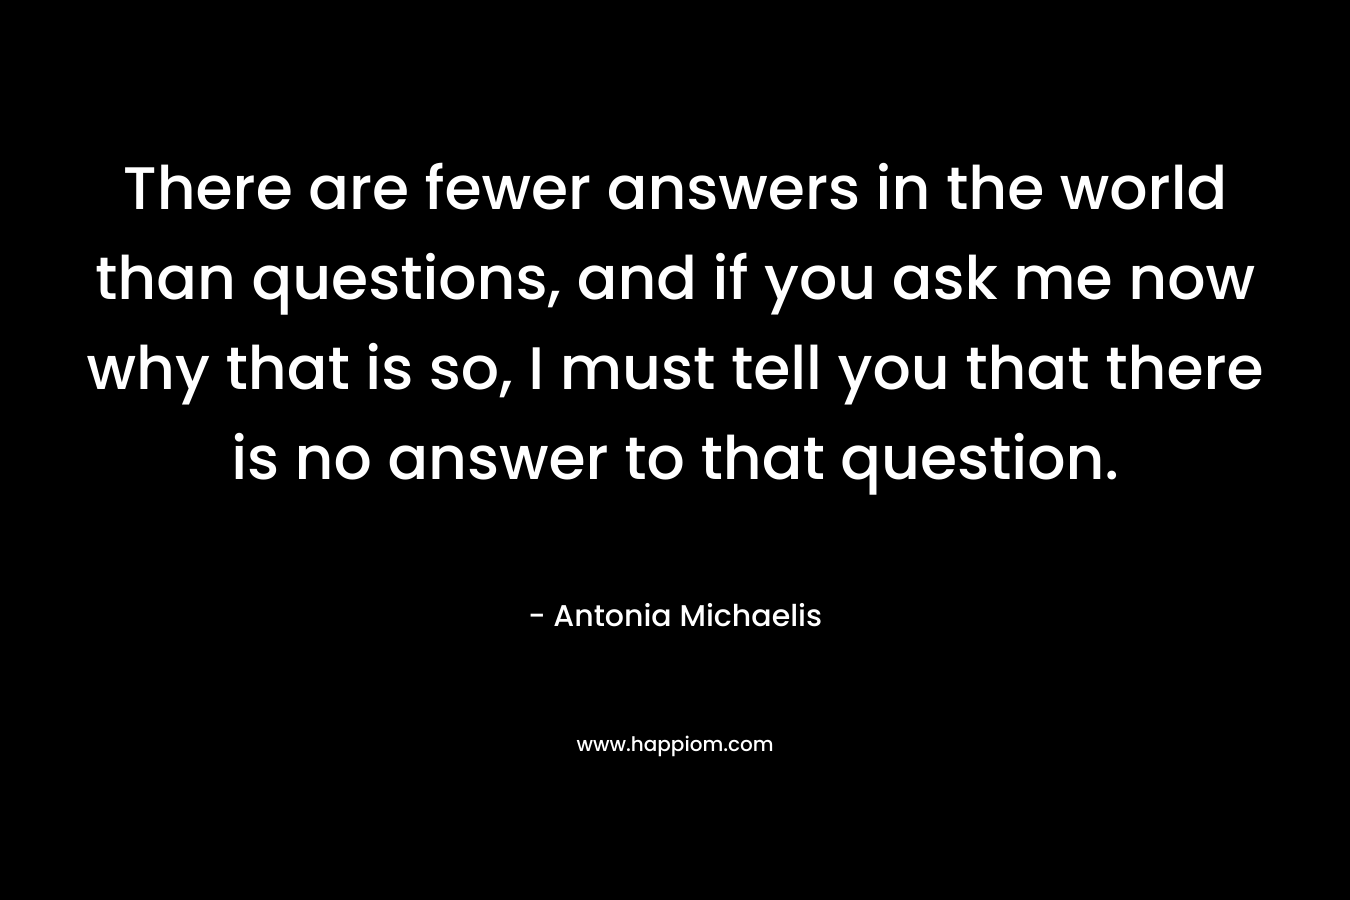 There are fewer answers in the world than questions, and if you ask me now why that is so, I must tell you that there is no answer to that question. – Antonia Michaelis